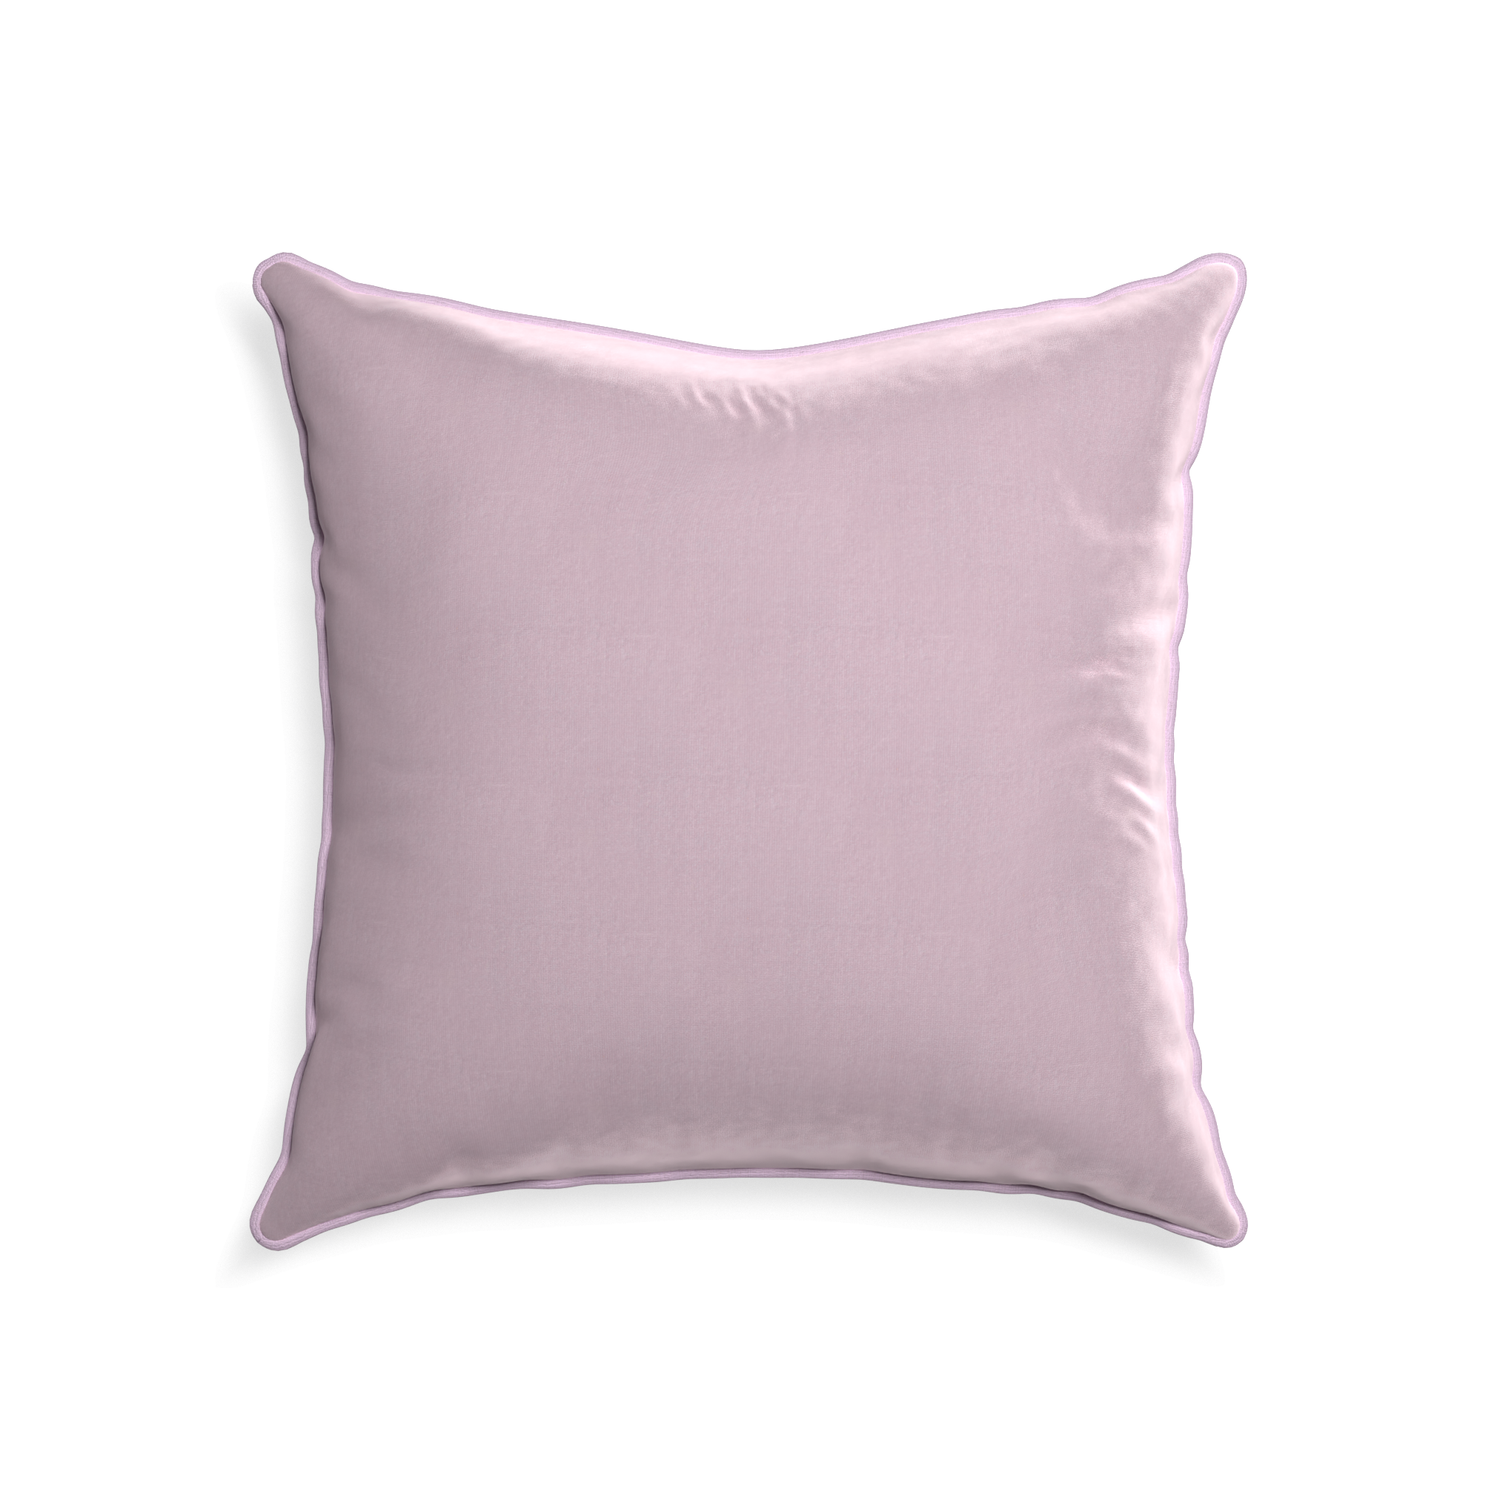 22-square lilac velvet custom pillow with l piping on white background